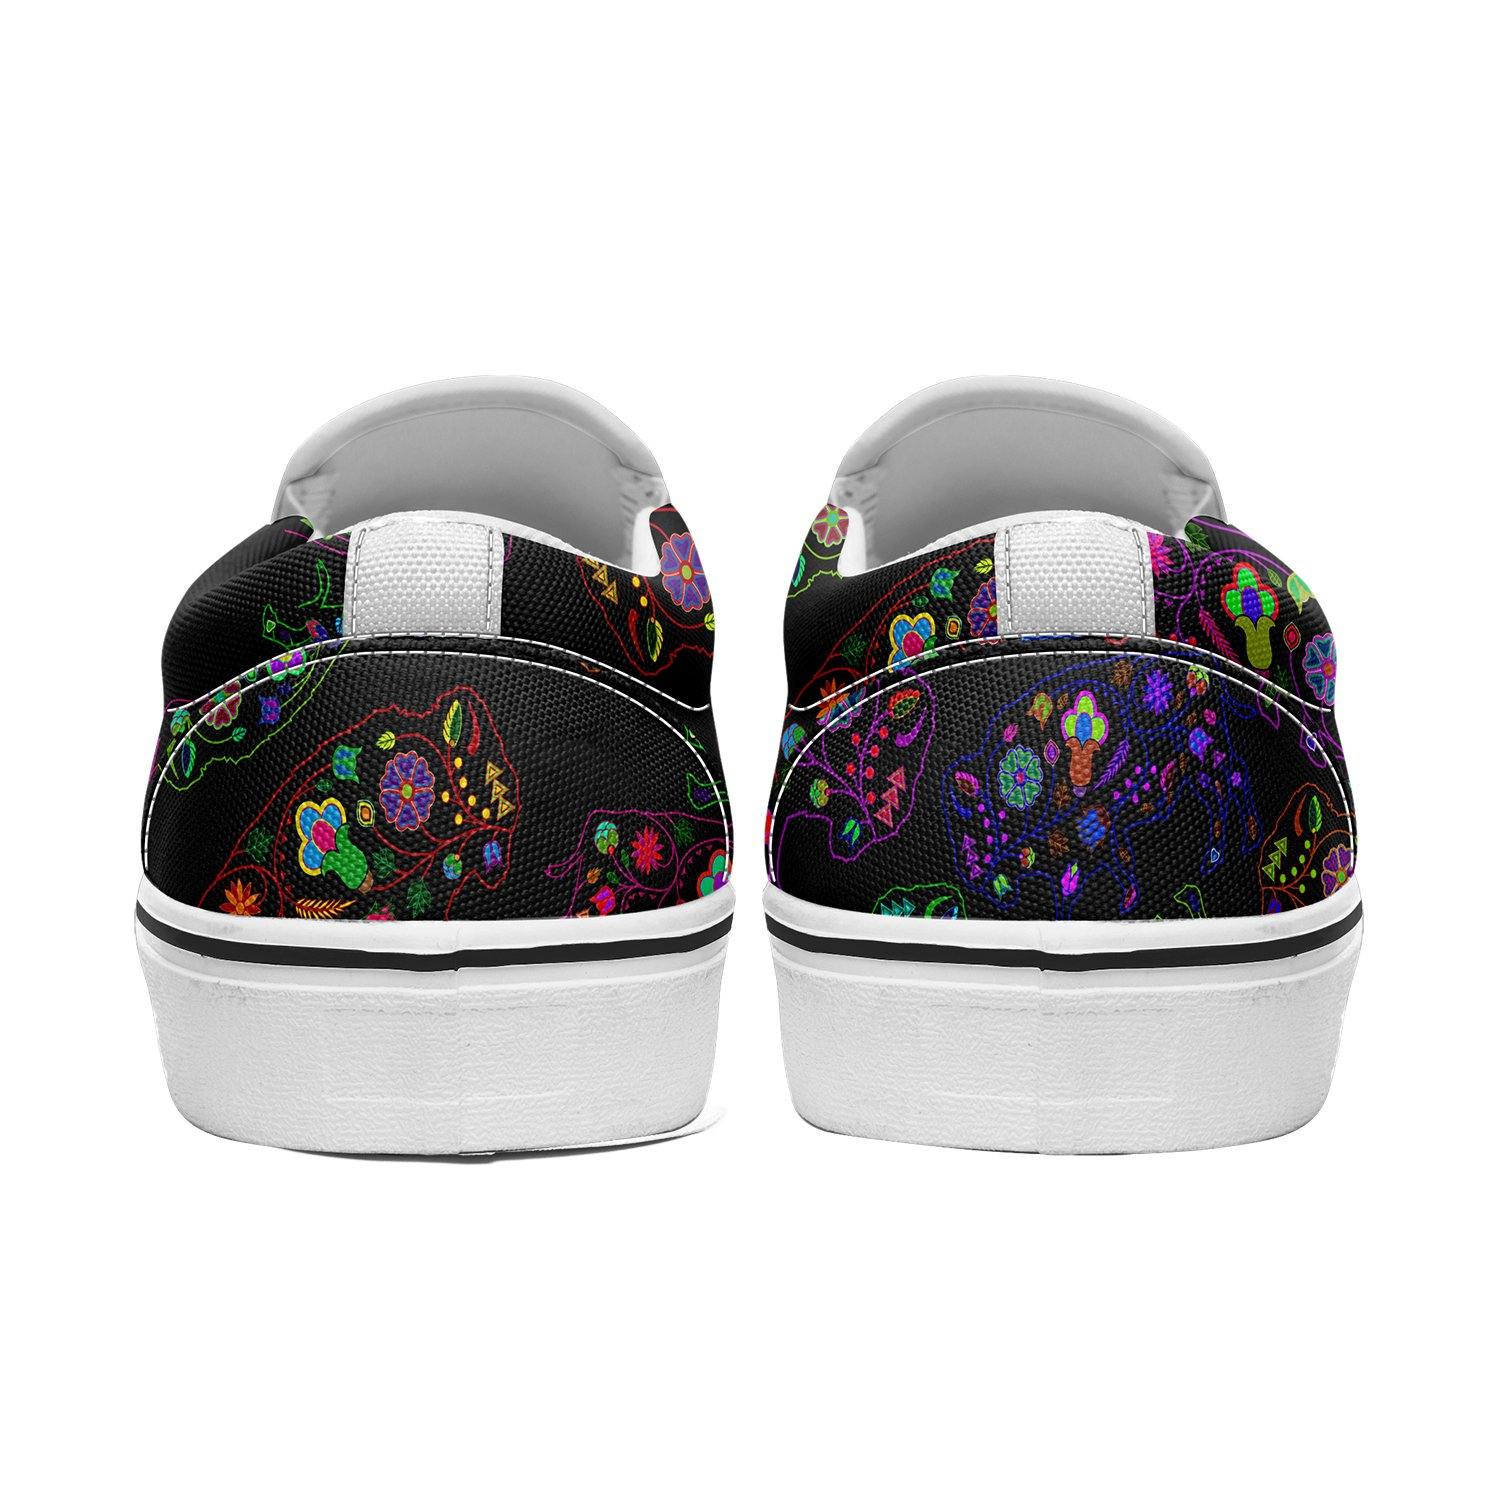 Floral Buffalo Otoyimm Canvas Slip On Shoes otoyimm Herman 